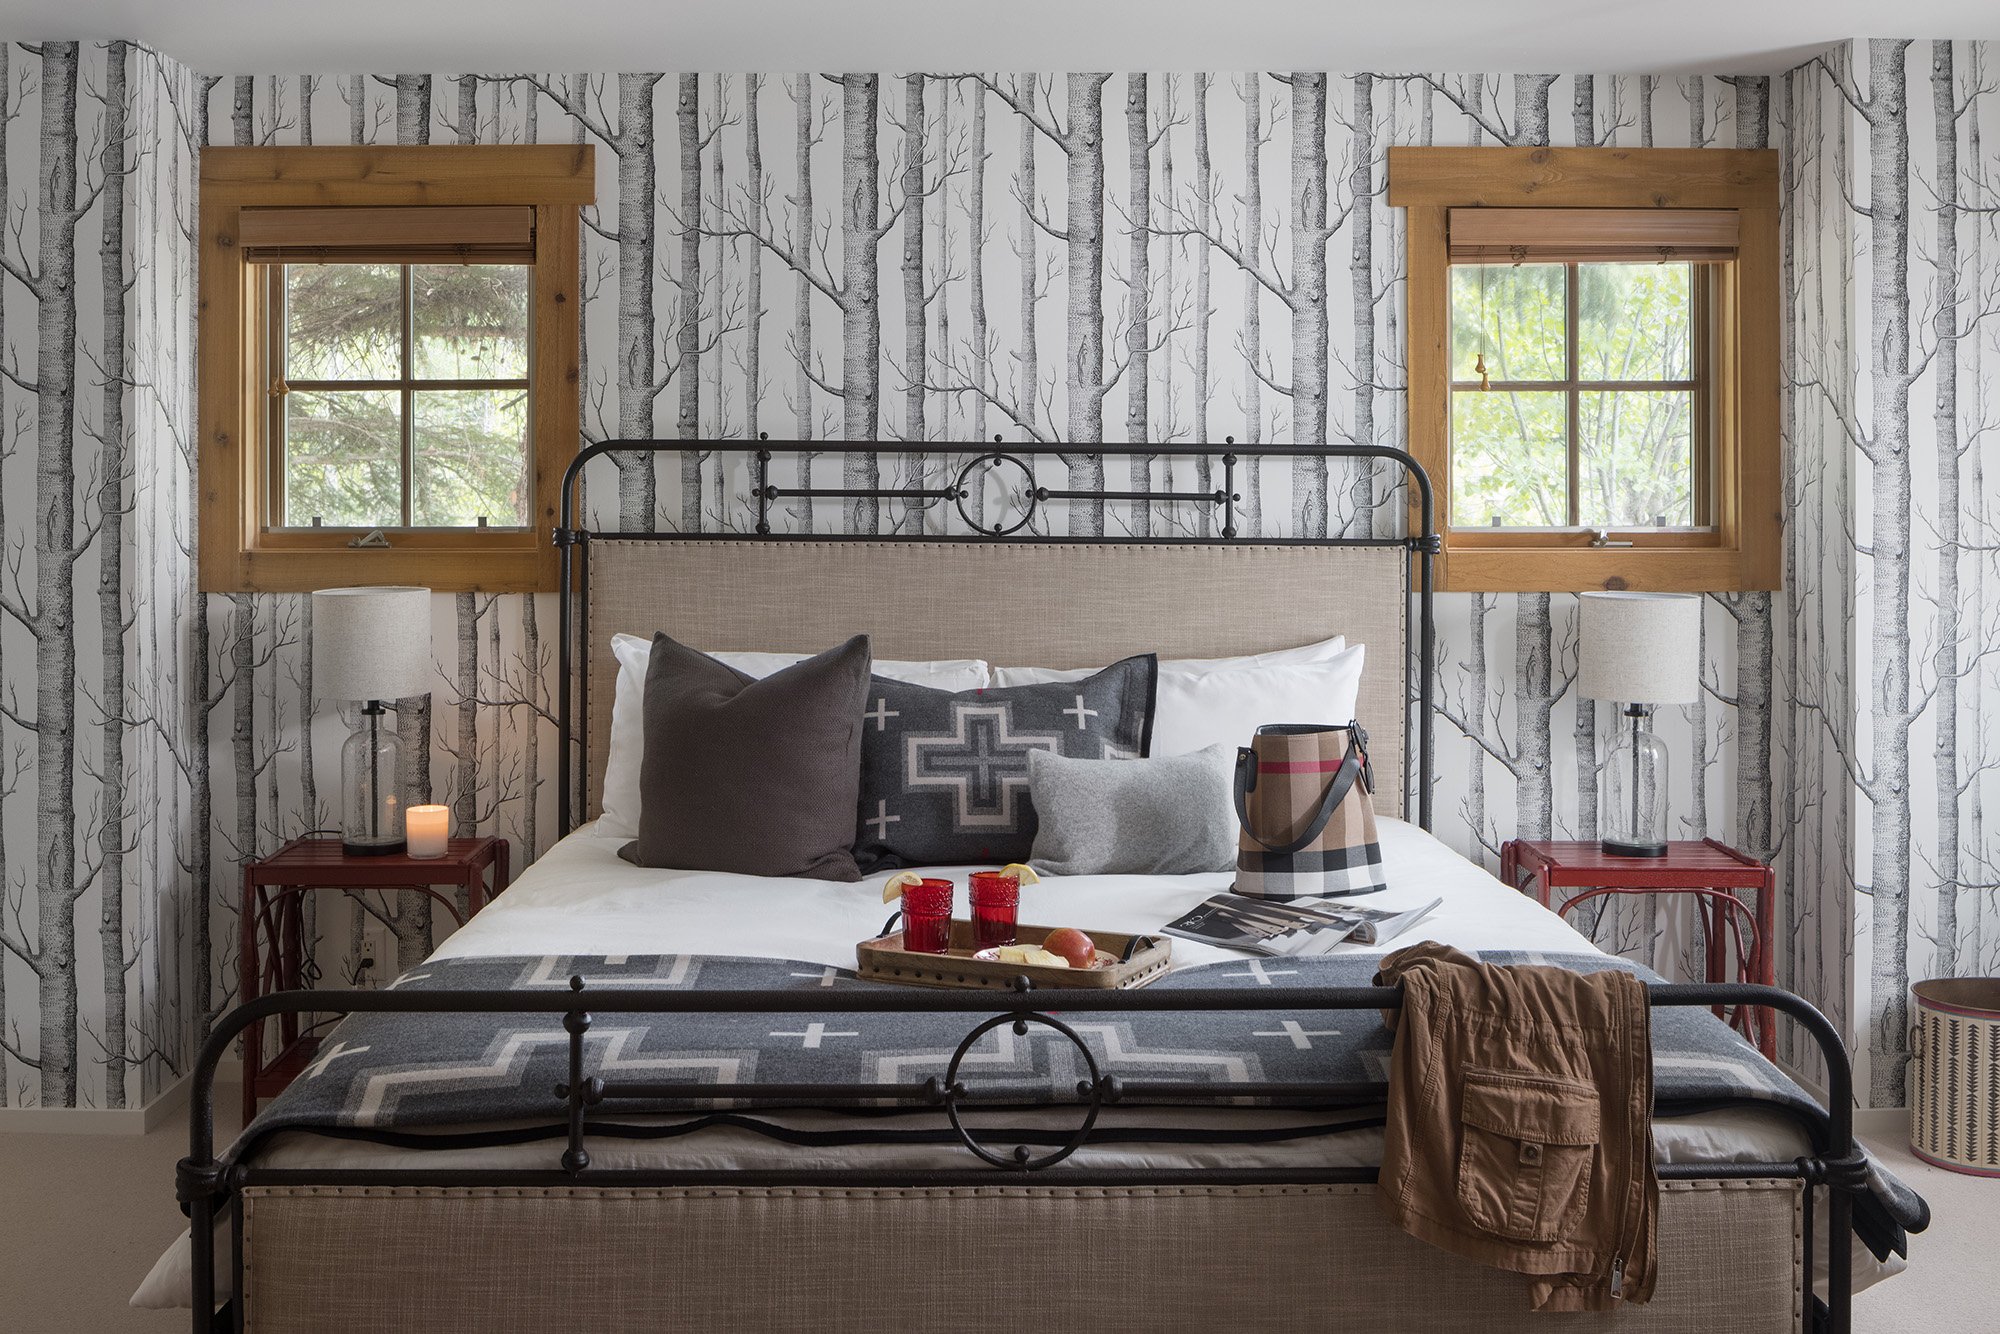 King size bed decorated in cabin like textiles with woods wallpaper